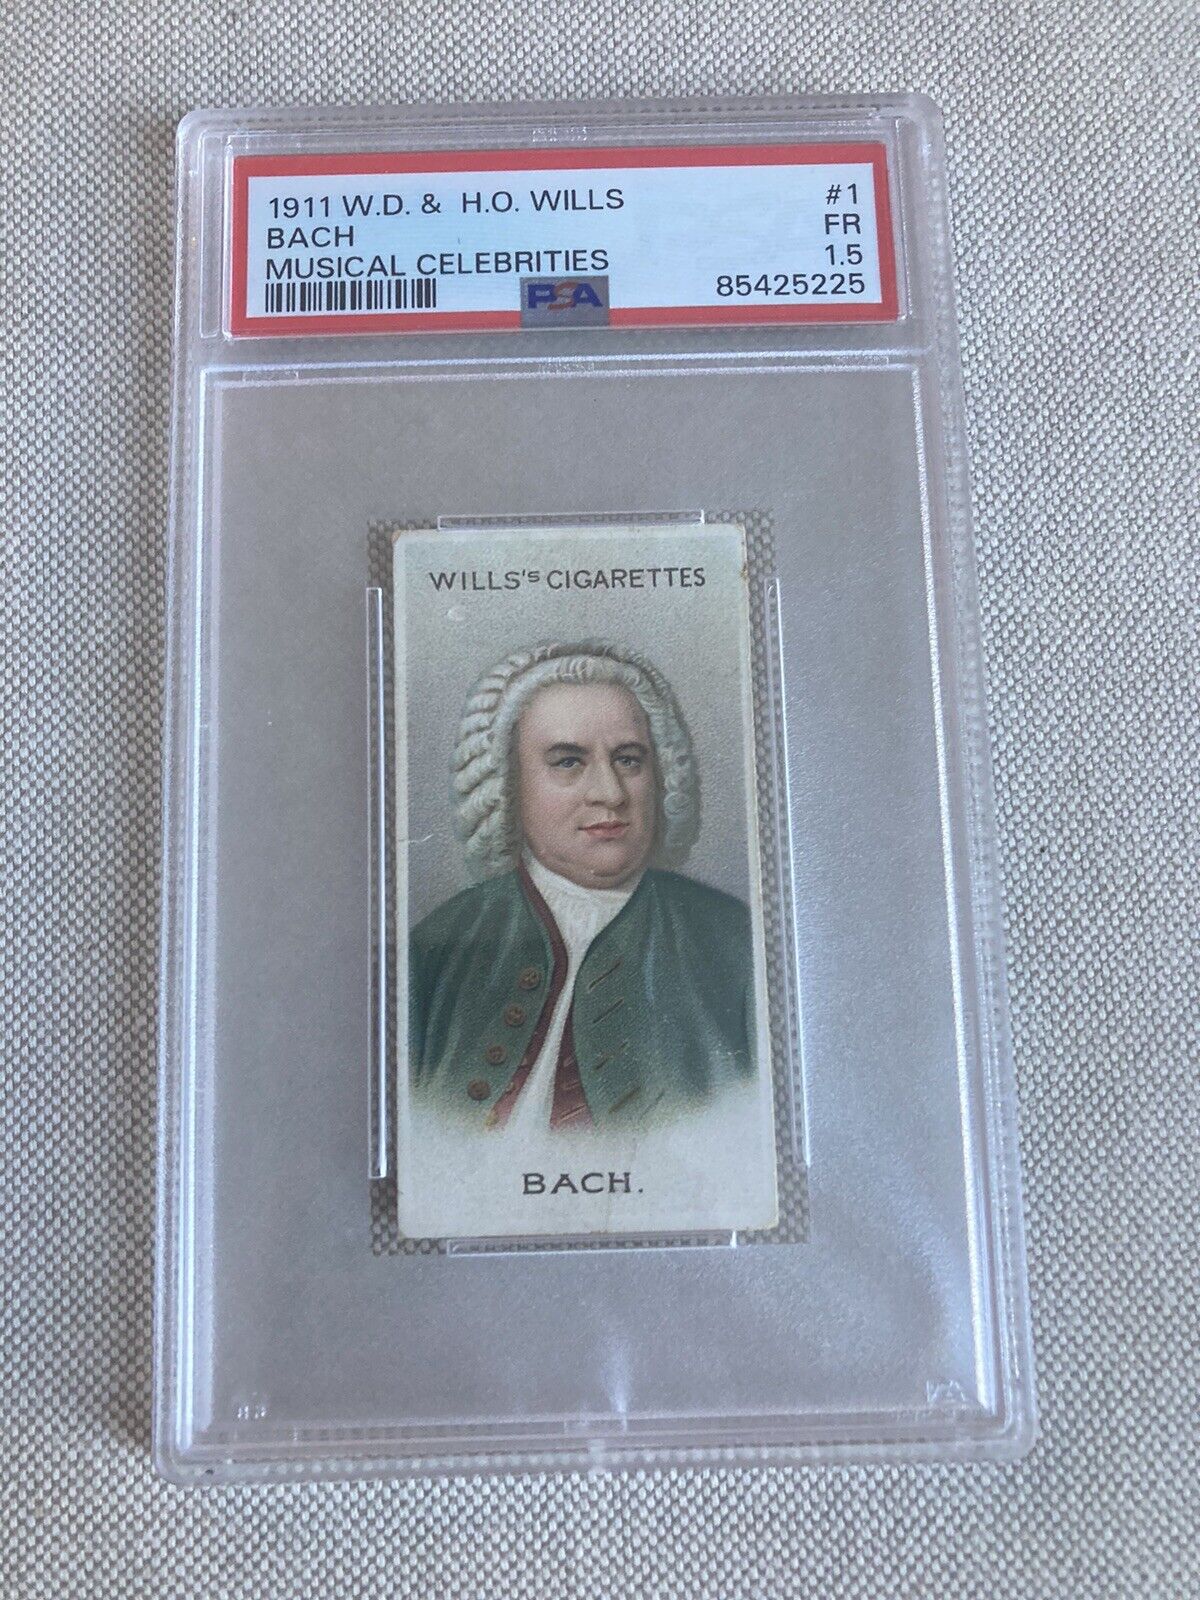 1911 Wills's Cigarettes Musical Celebrities BACH PSA 1.5 LOW POP Rc Rookie 🔥